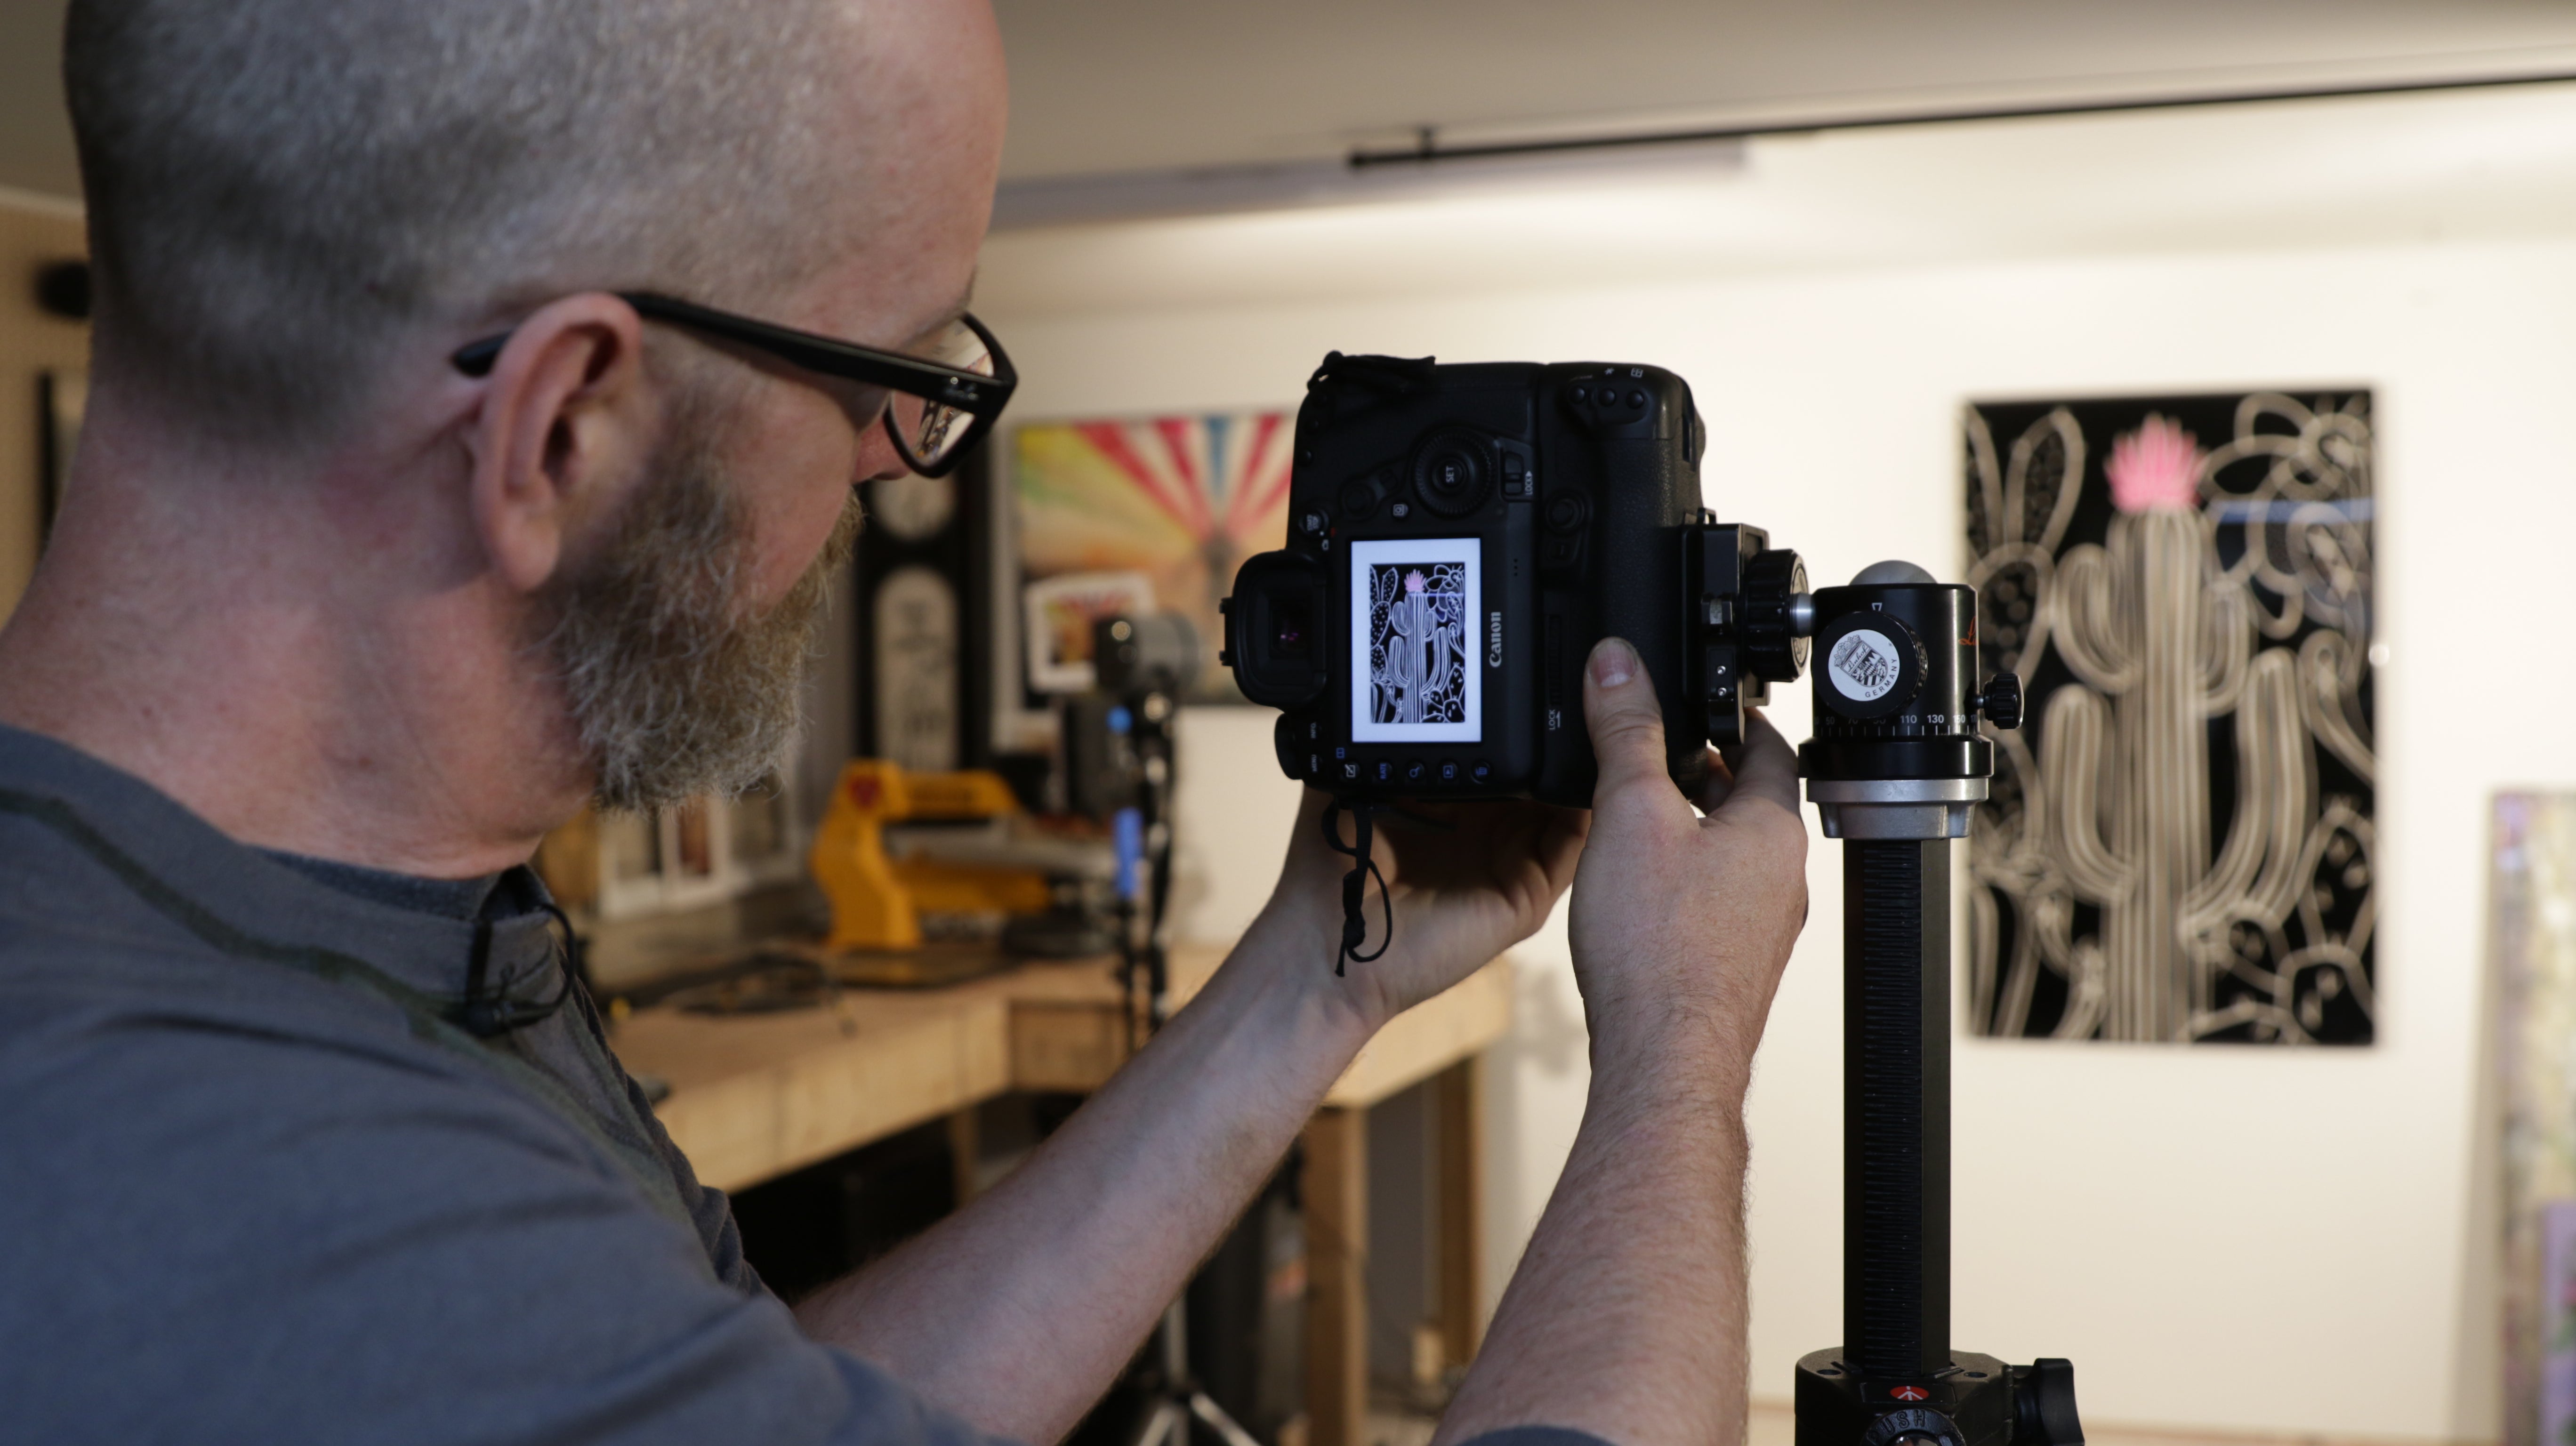 Photograph Your Resin Art Like A Pro - learn how to make easy corrections on your camera